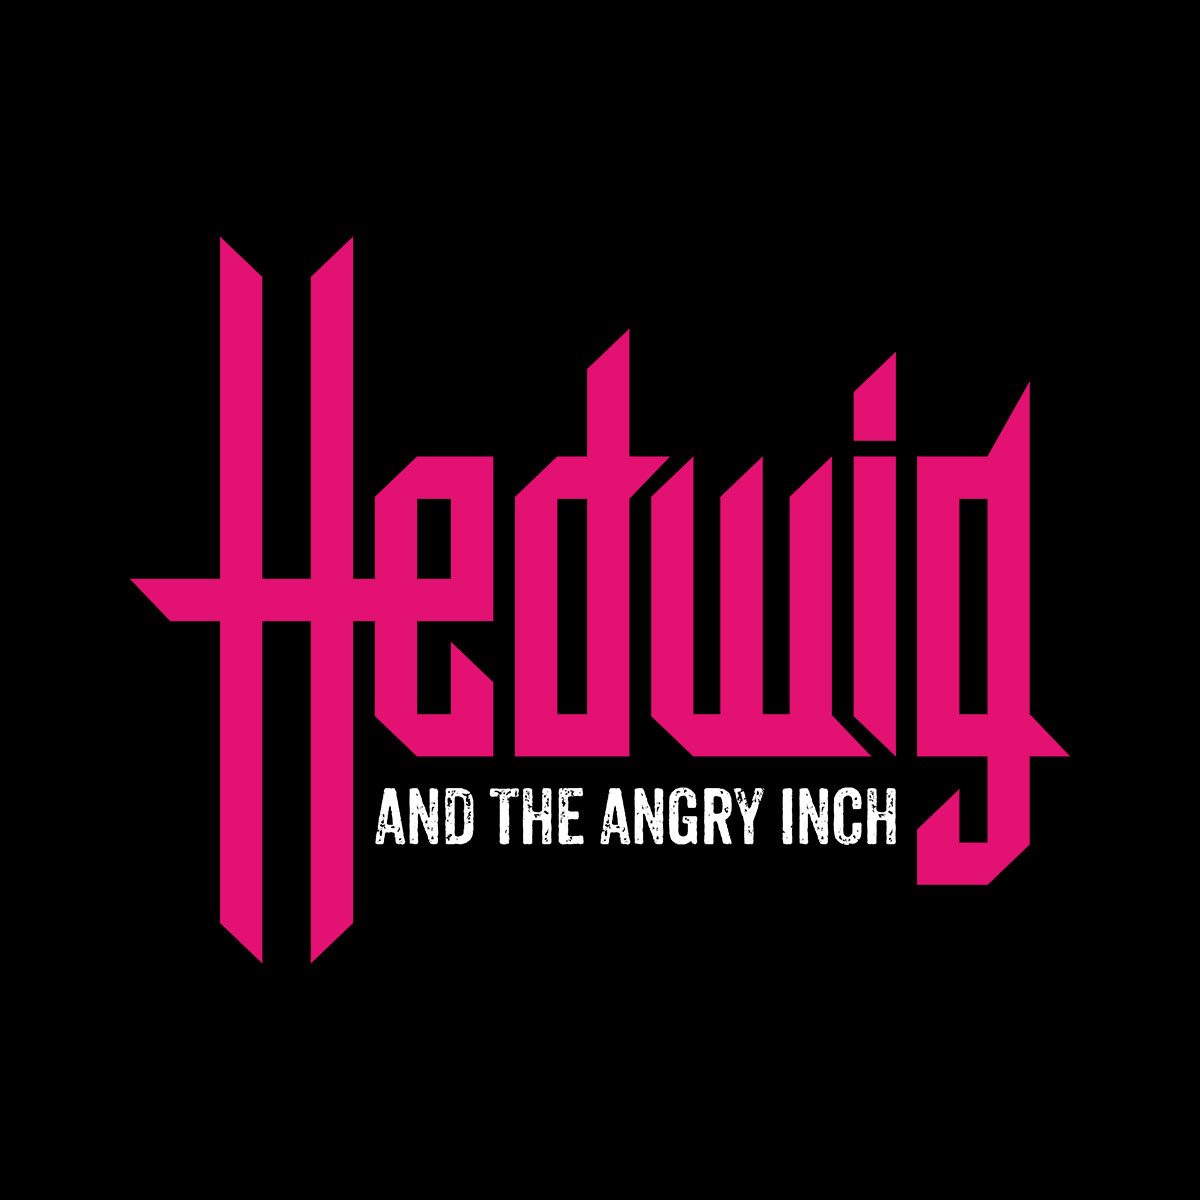 Waterfront Playhouse Presents:  HEDWIG AND THE ANGRY INCH